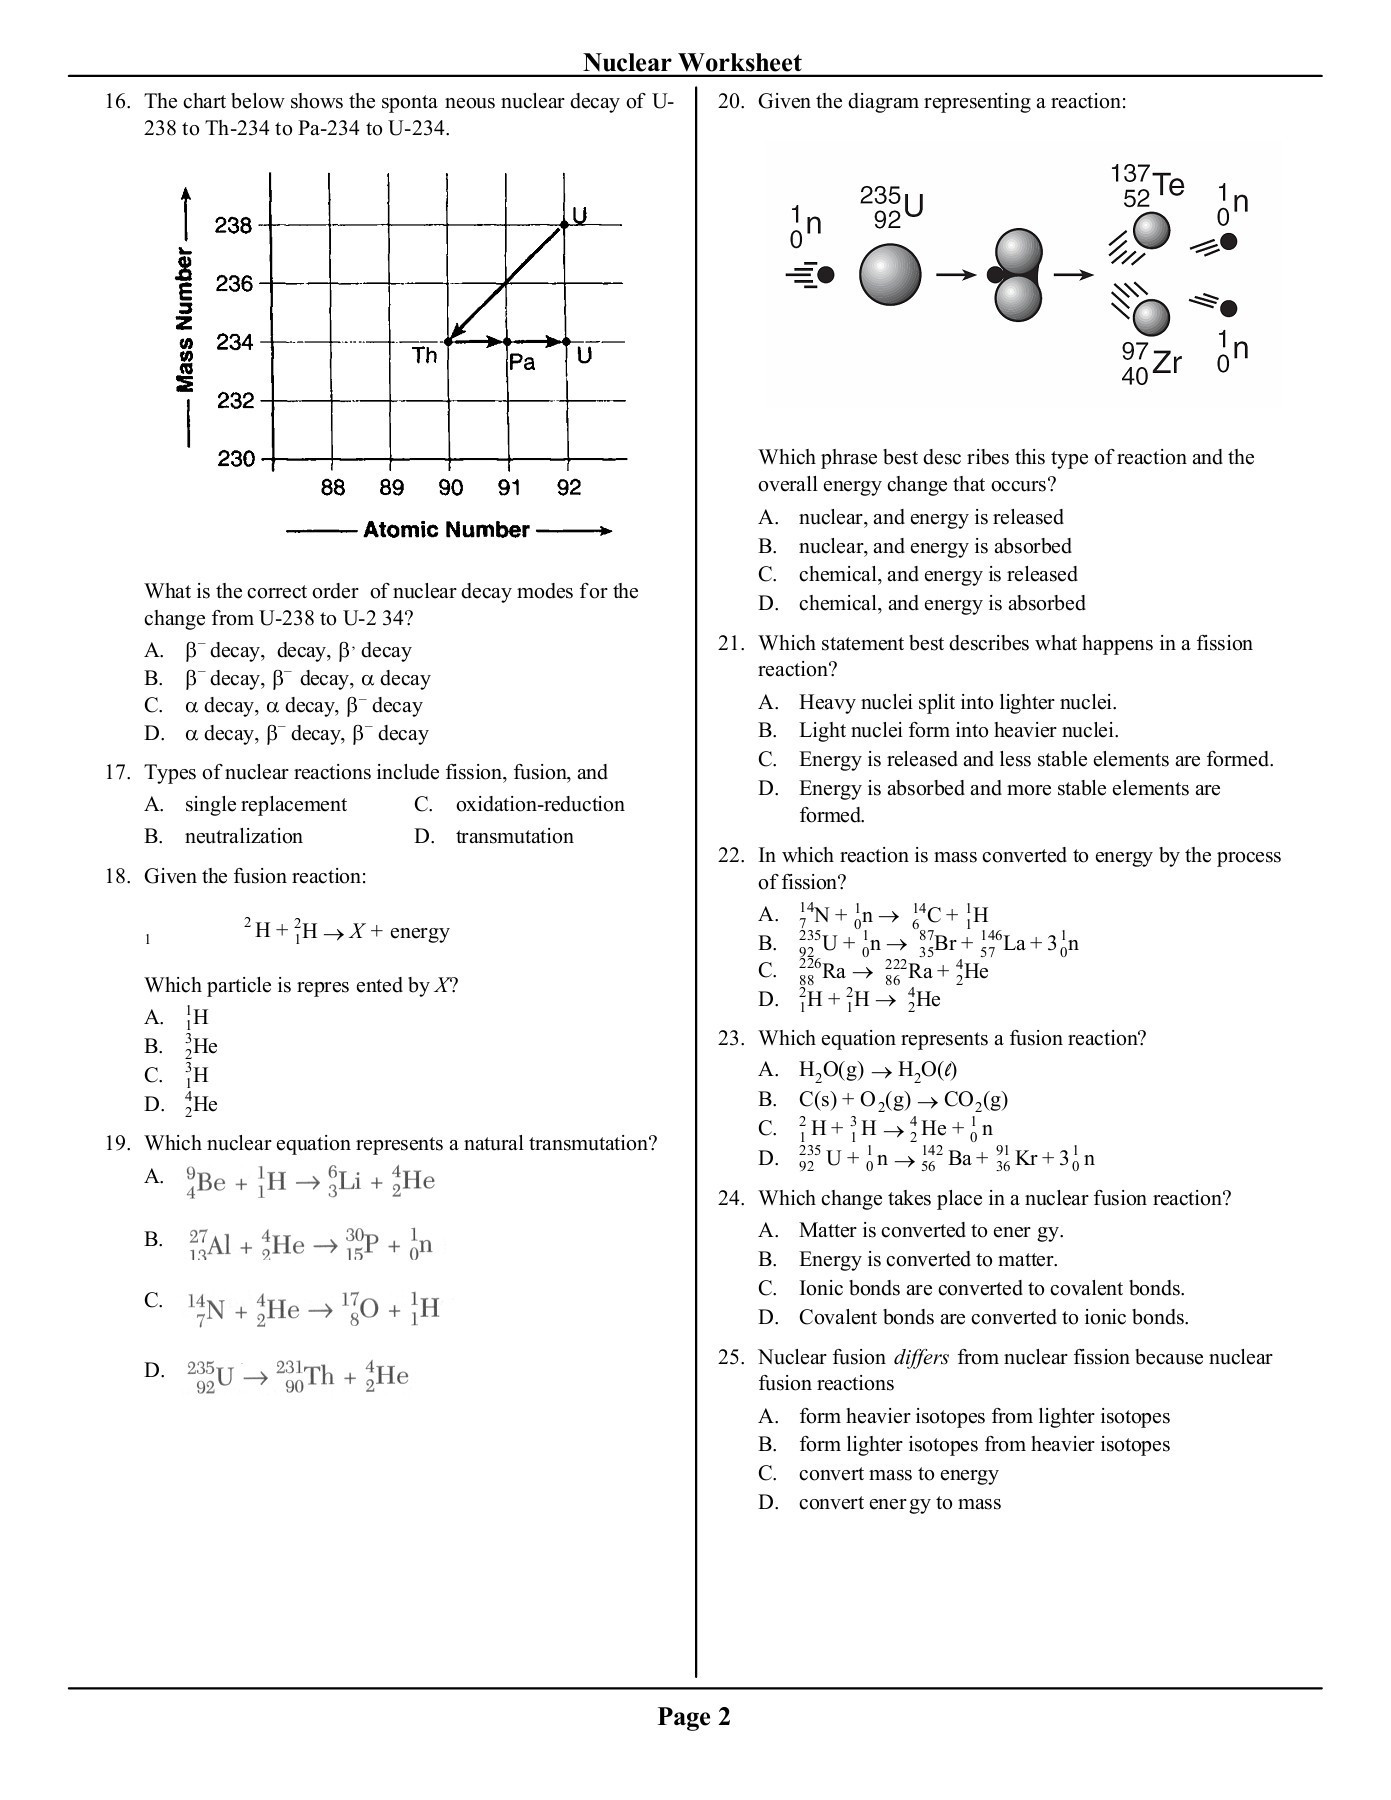 Nuclear Decay Worksheet Answers Regents Review Nuclear Worksheet Mr Beauchamp Pages 1 5